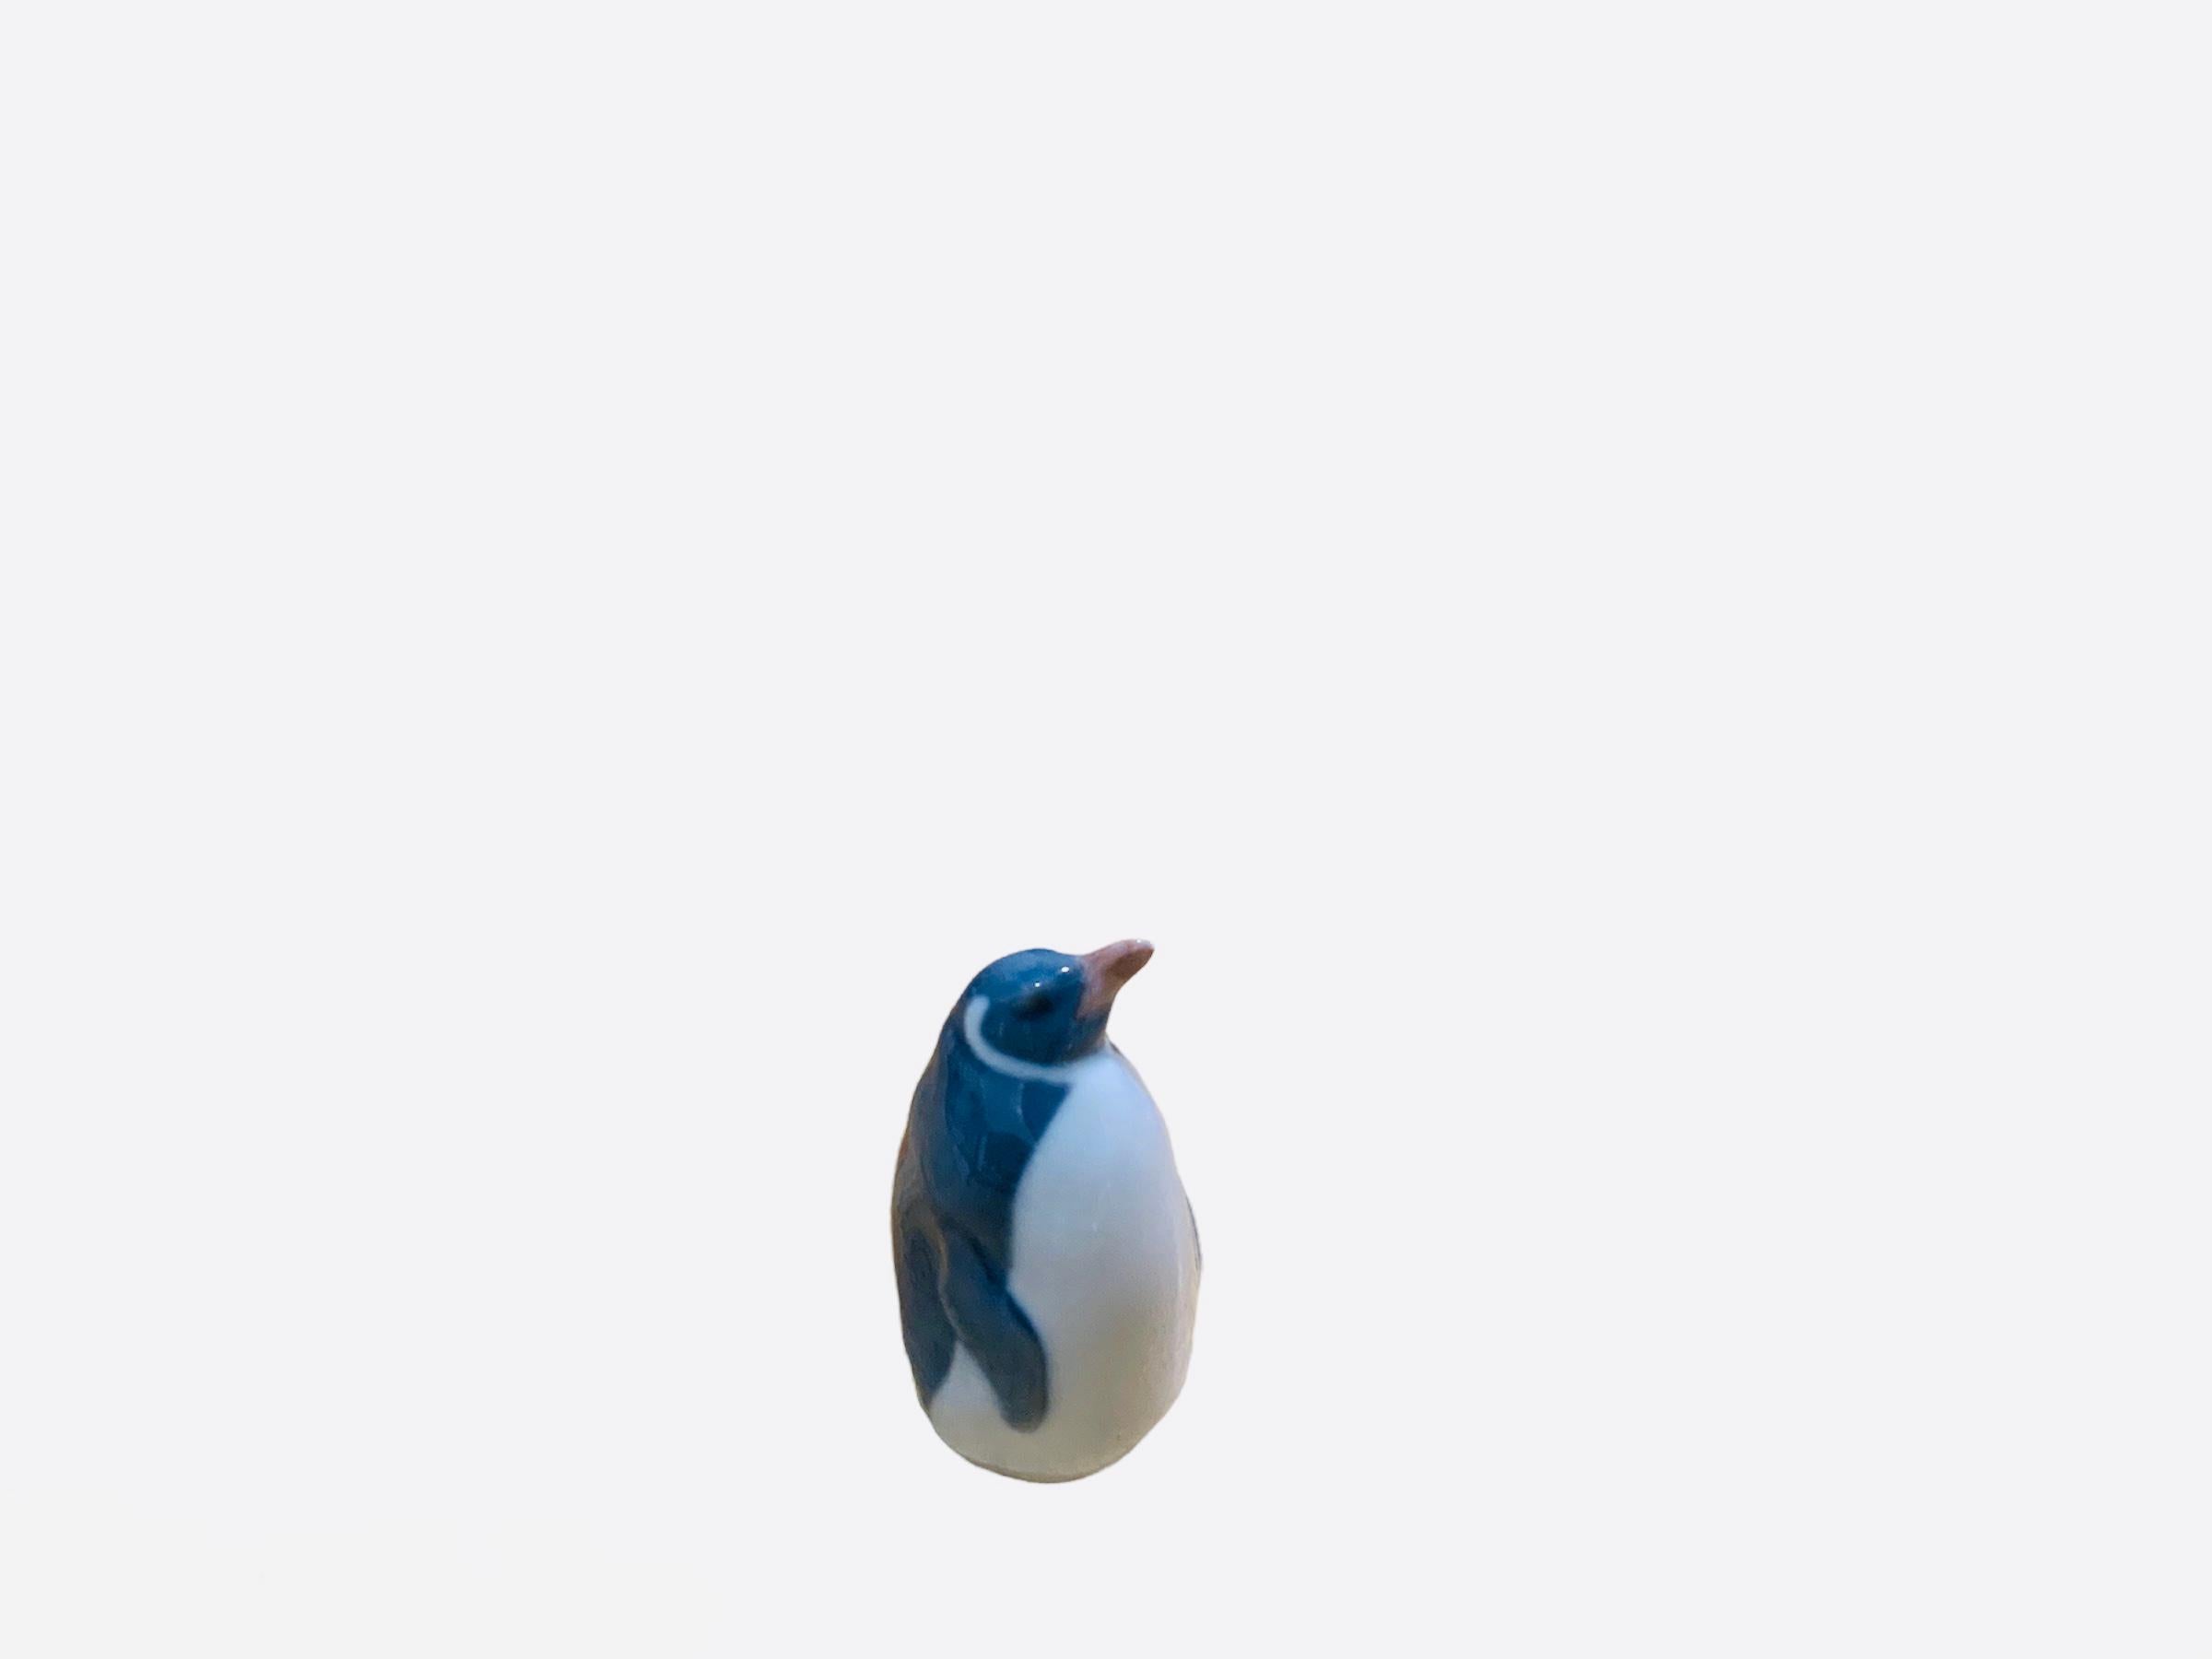 This is a Royal Copenhagen porcelain of small sharp and proud bird figurine known as a penguin. At the base is the Royal Copenhagen hallmark with the number-3003, a crown and Denmark. It is hand painted white, blue and grey.